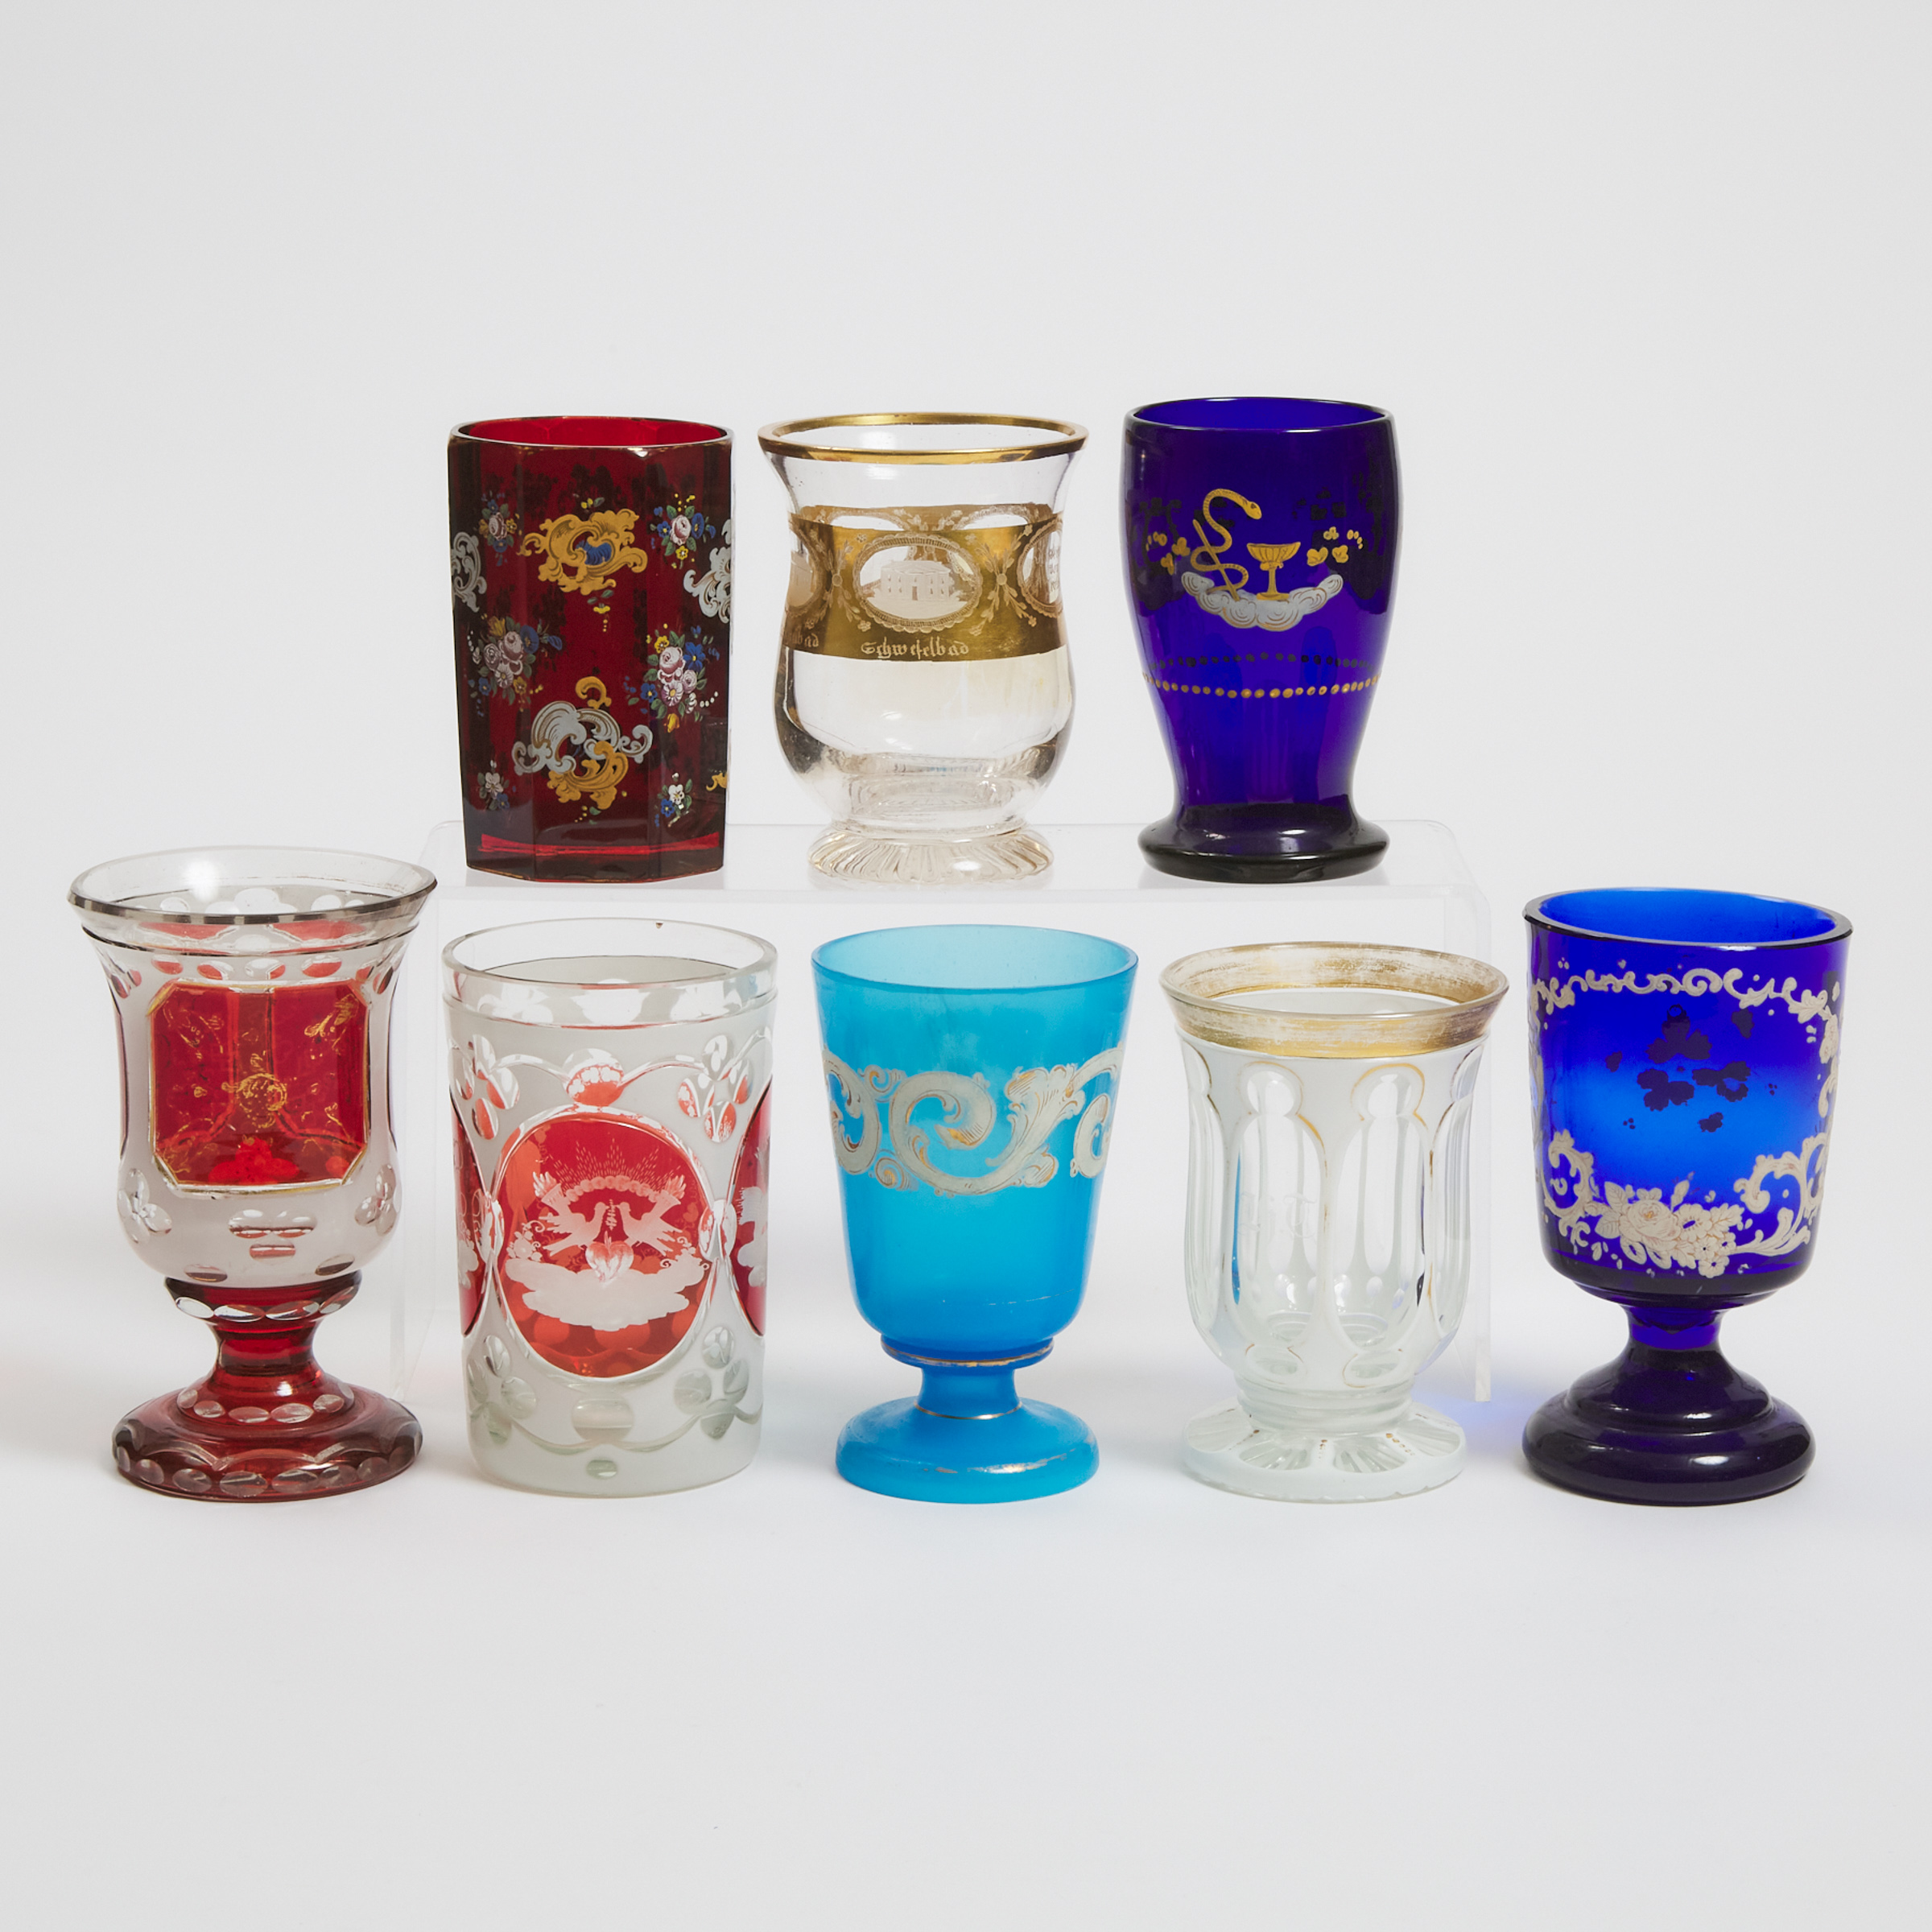 Eight Bohemian Overlaid, Enameled and Gilt Glass Goblets, mid-late 19th century